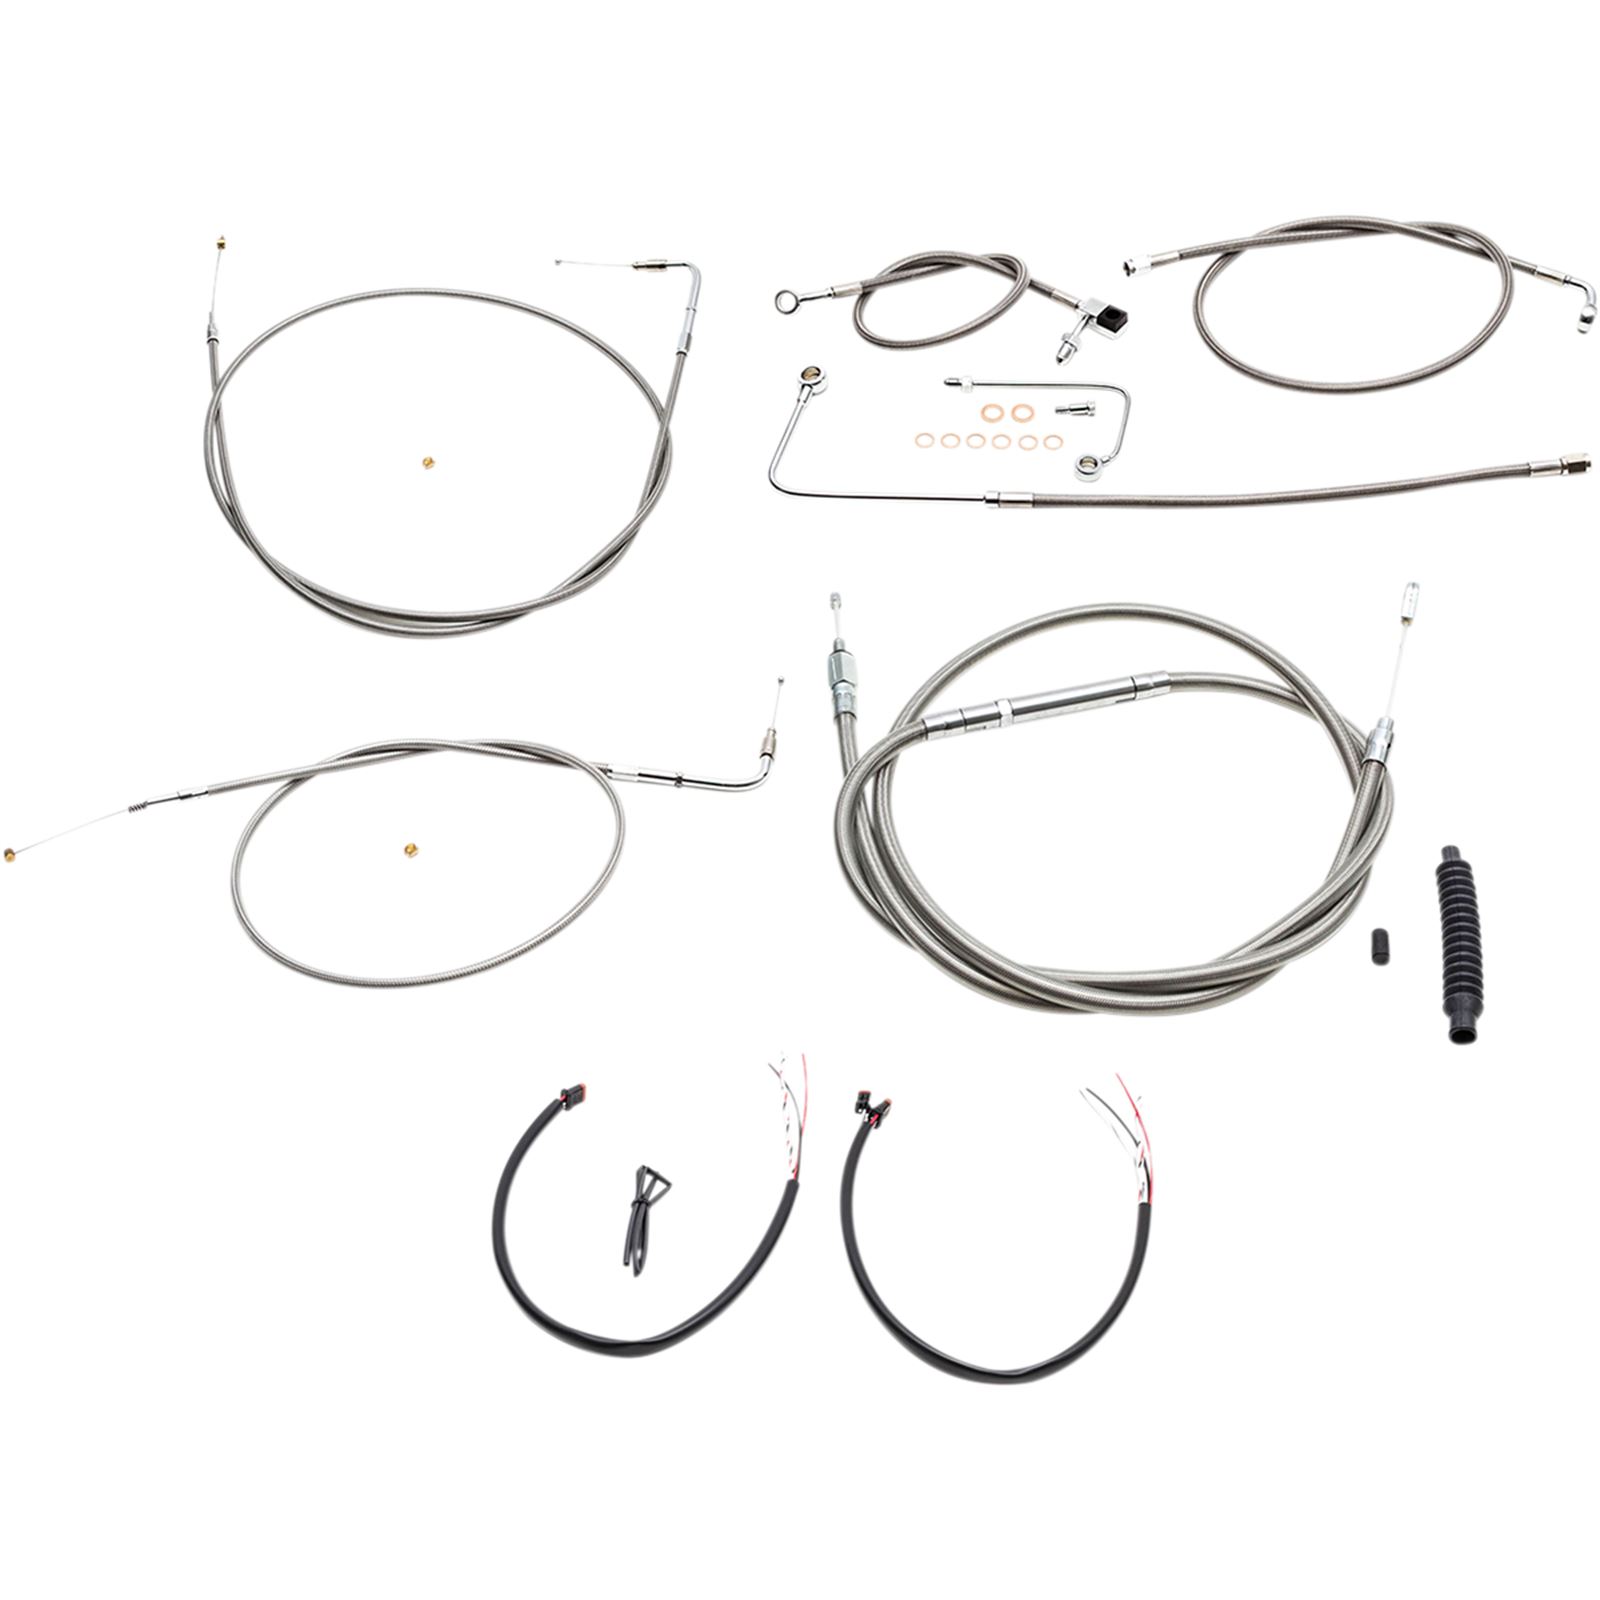 LA Choppers 18" - 20" Cable Kit for '15 Softail